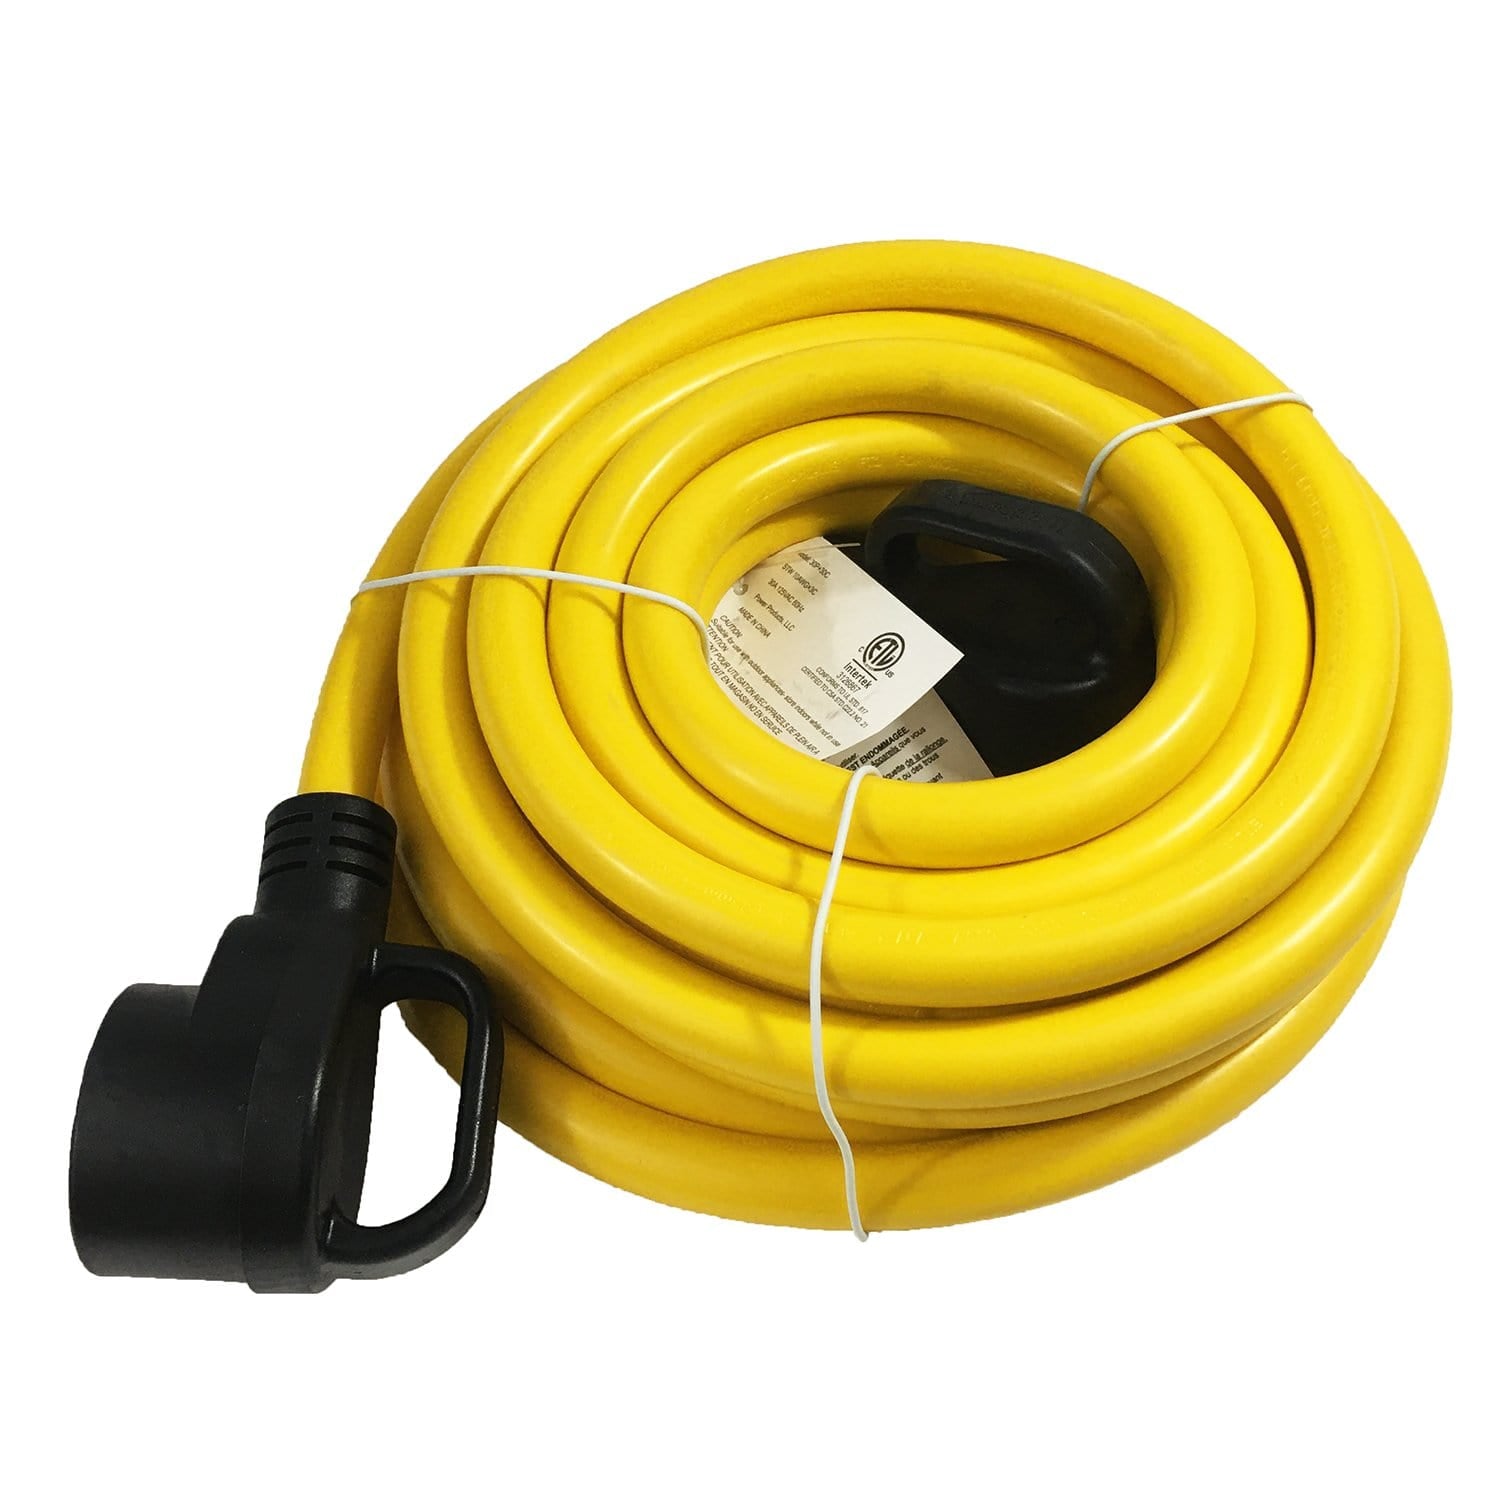 Power Products 30ARVE25 Extension Cord w/Hdl 25' 30A